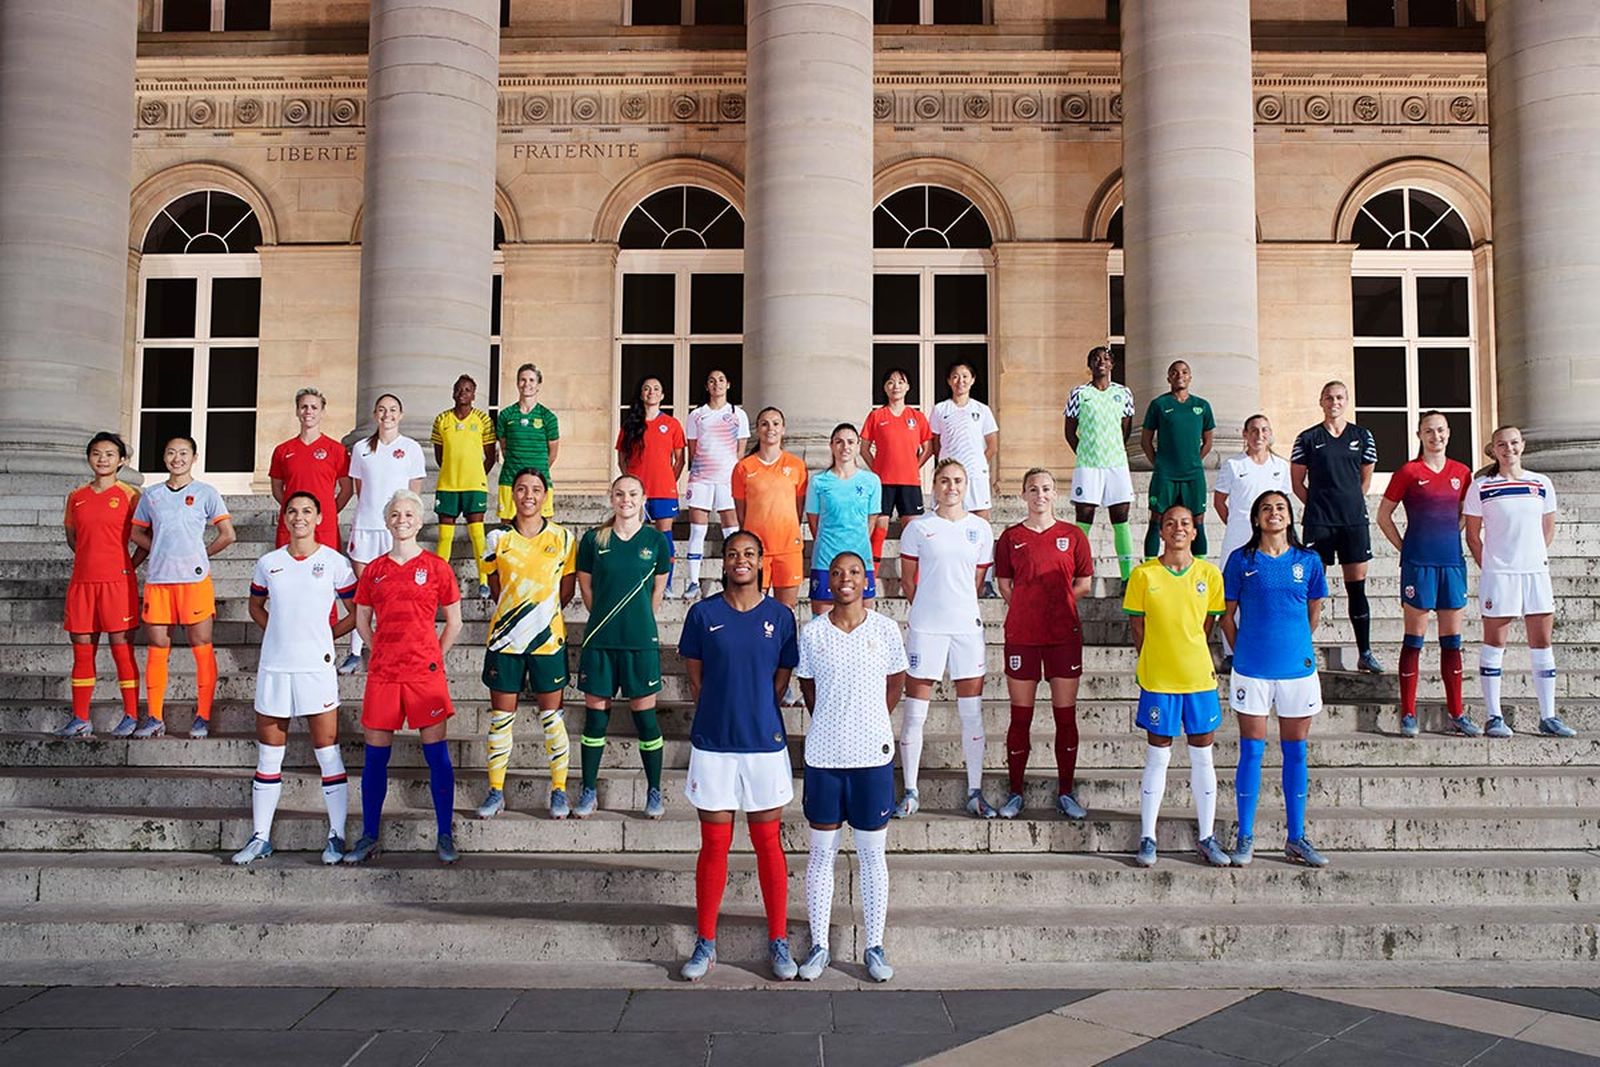 Arenoso monitor Viaje Nike Unveils its First Women's Dedicated World Cup Kits